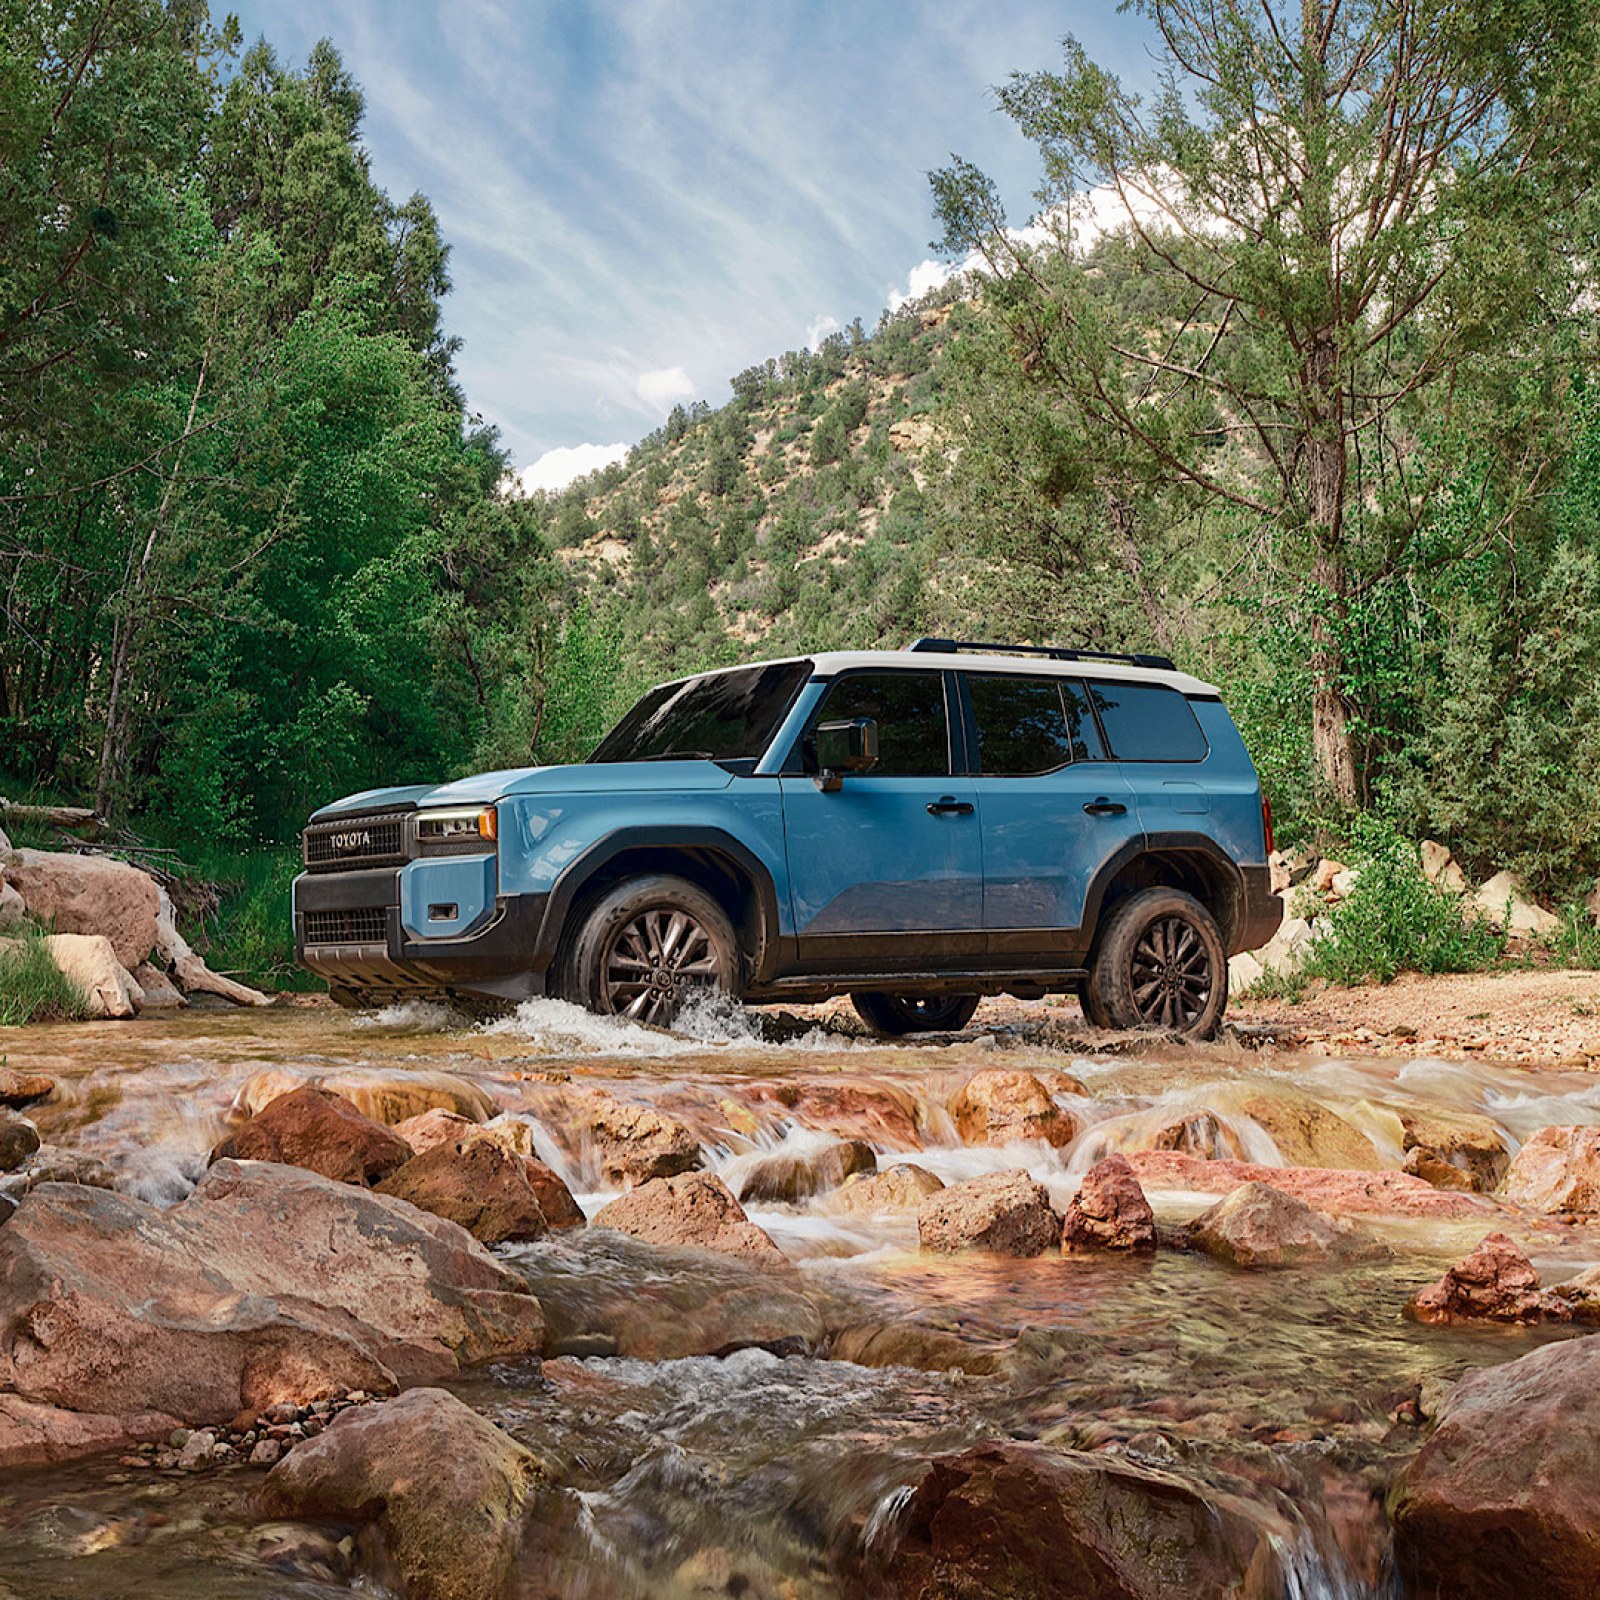 Toyota Land Cruiser Offroader Returns to North America With Lower Price -  Bloomberg